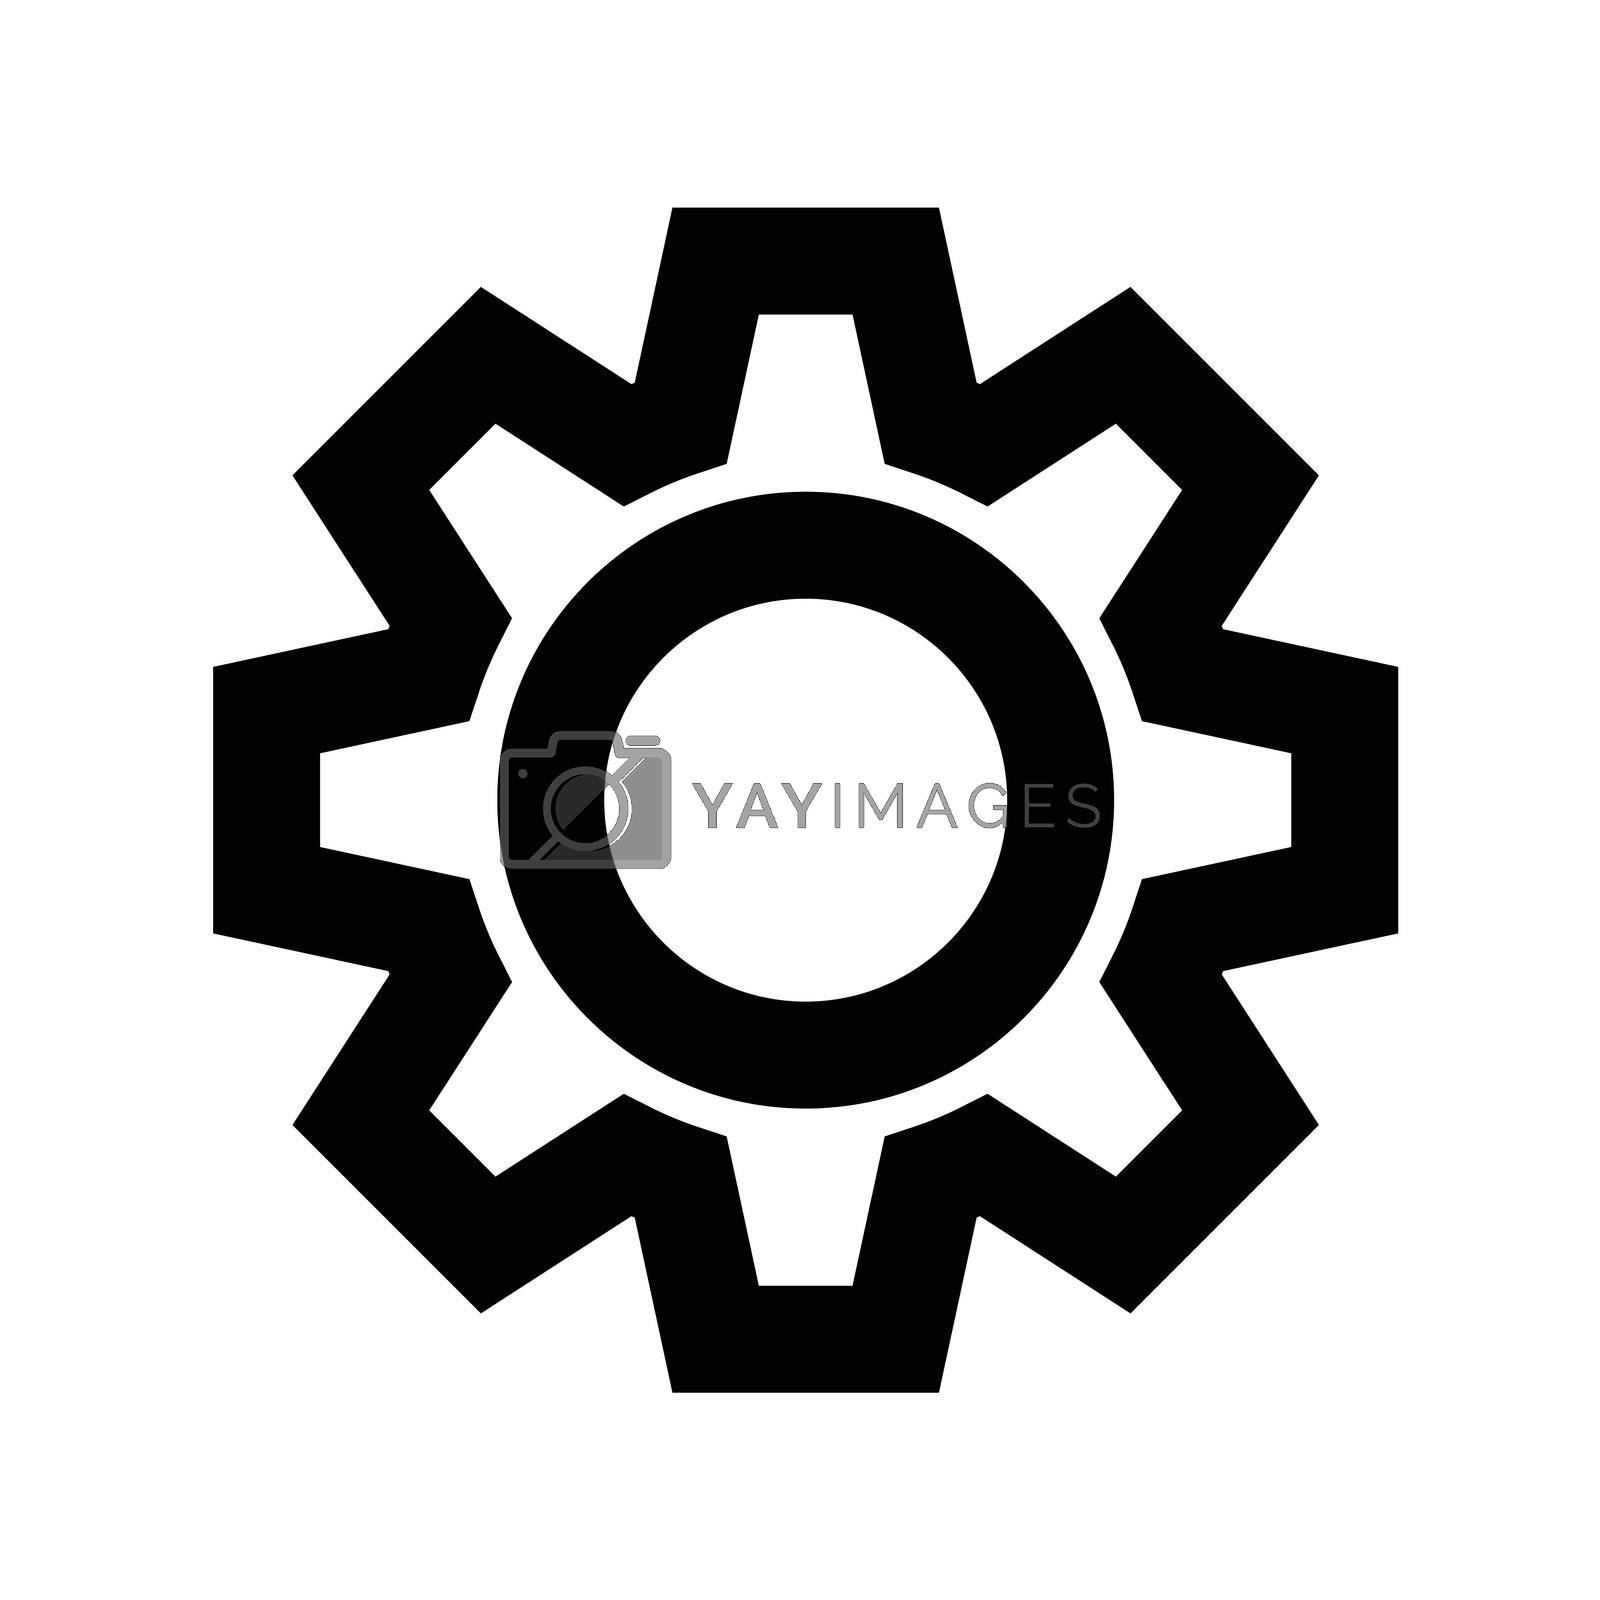 Royalty free image of Gears silhouette icon. Customizable icons. by illust_monster